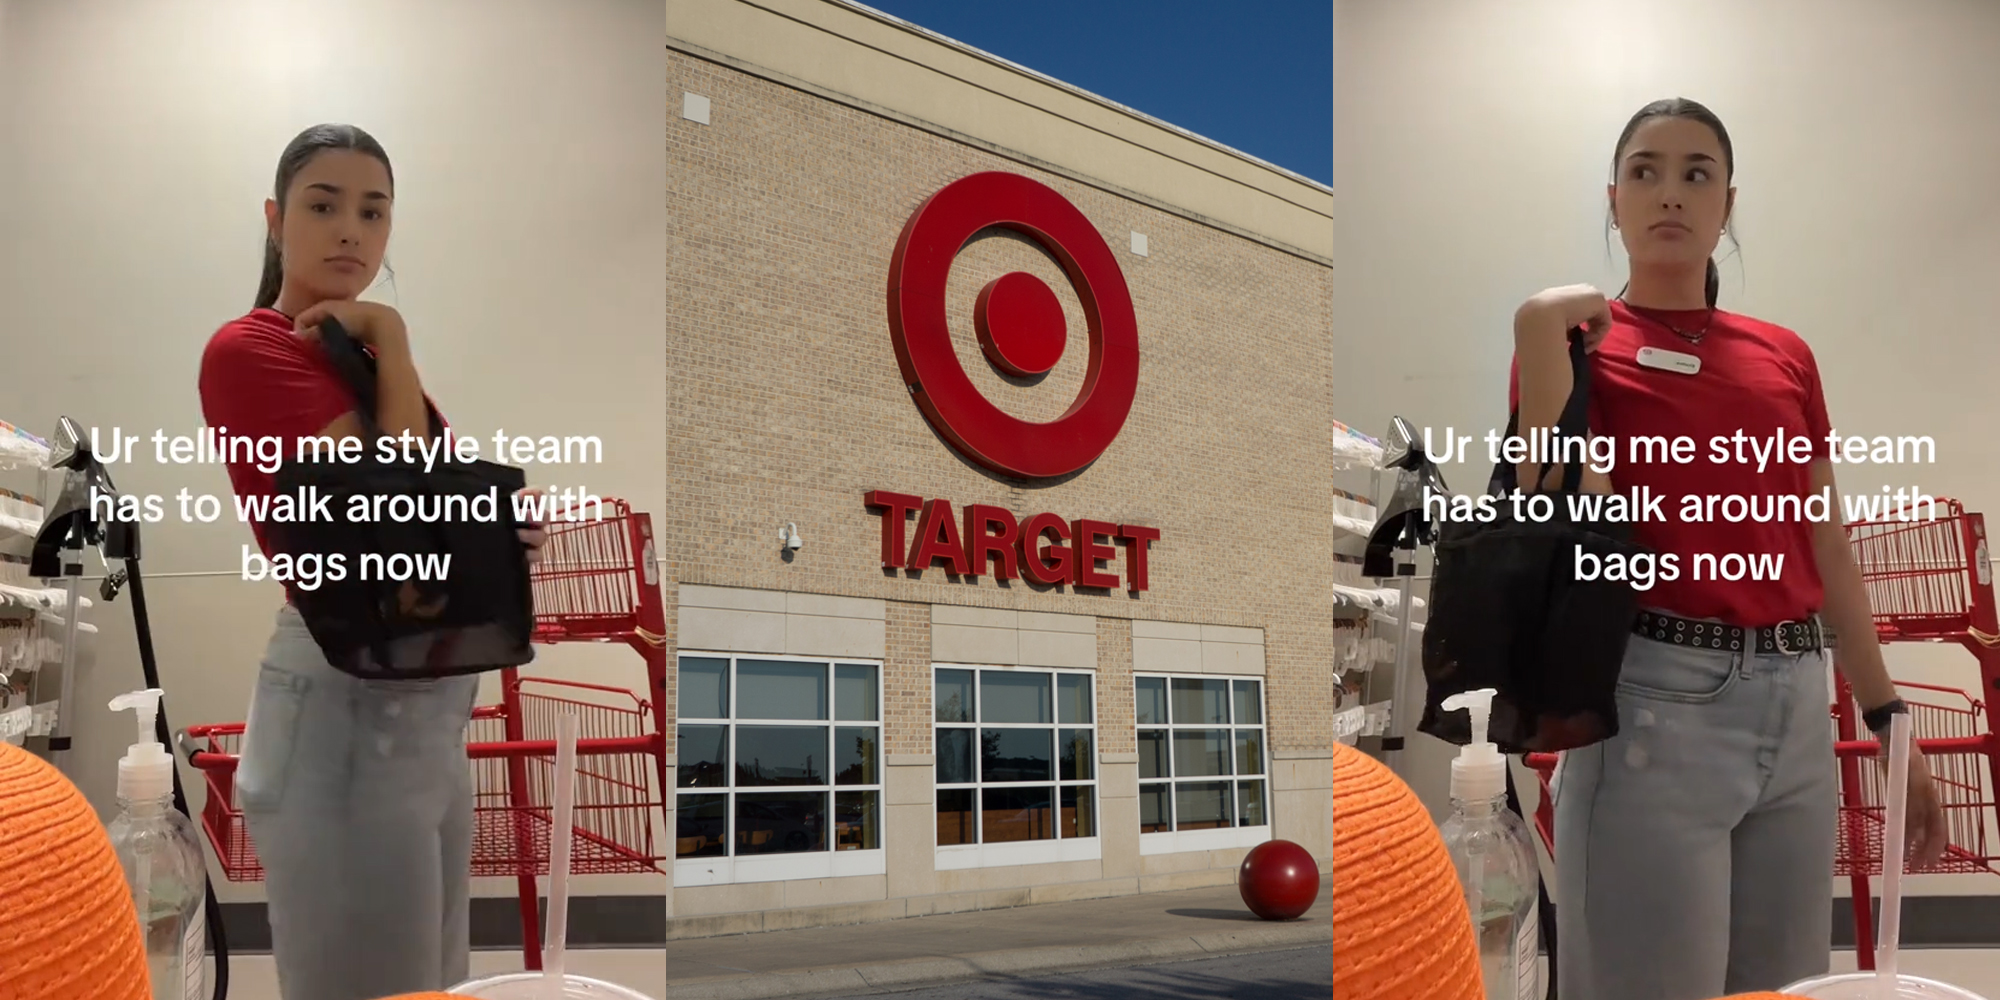 Target customer pushing retail giant to give up plastic bags